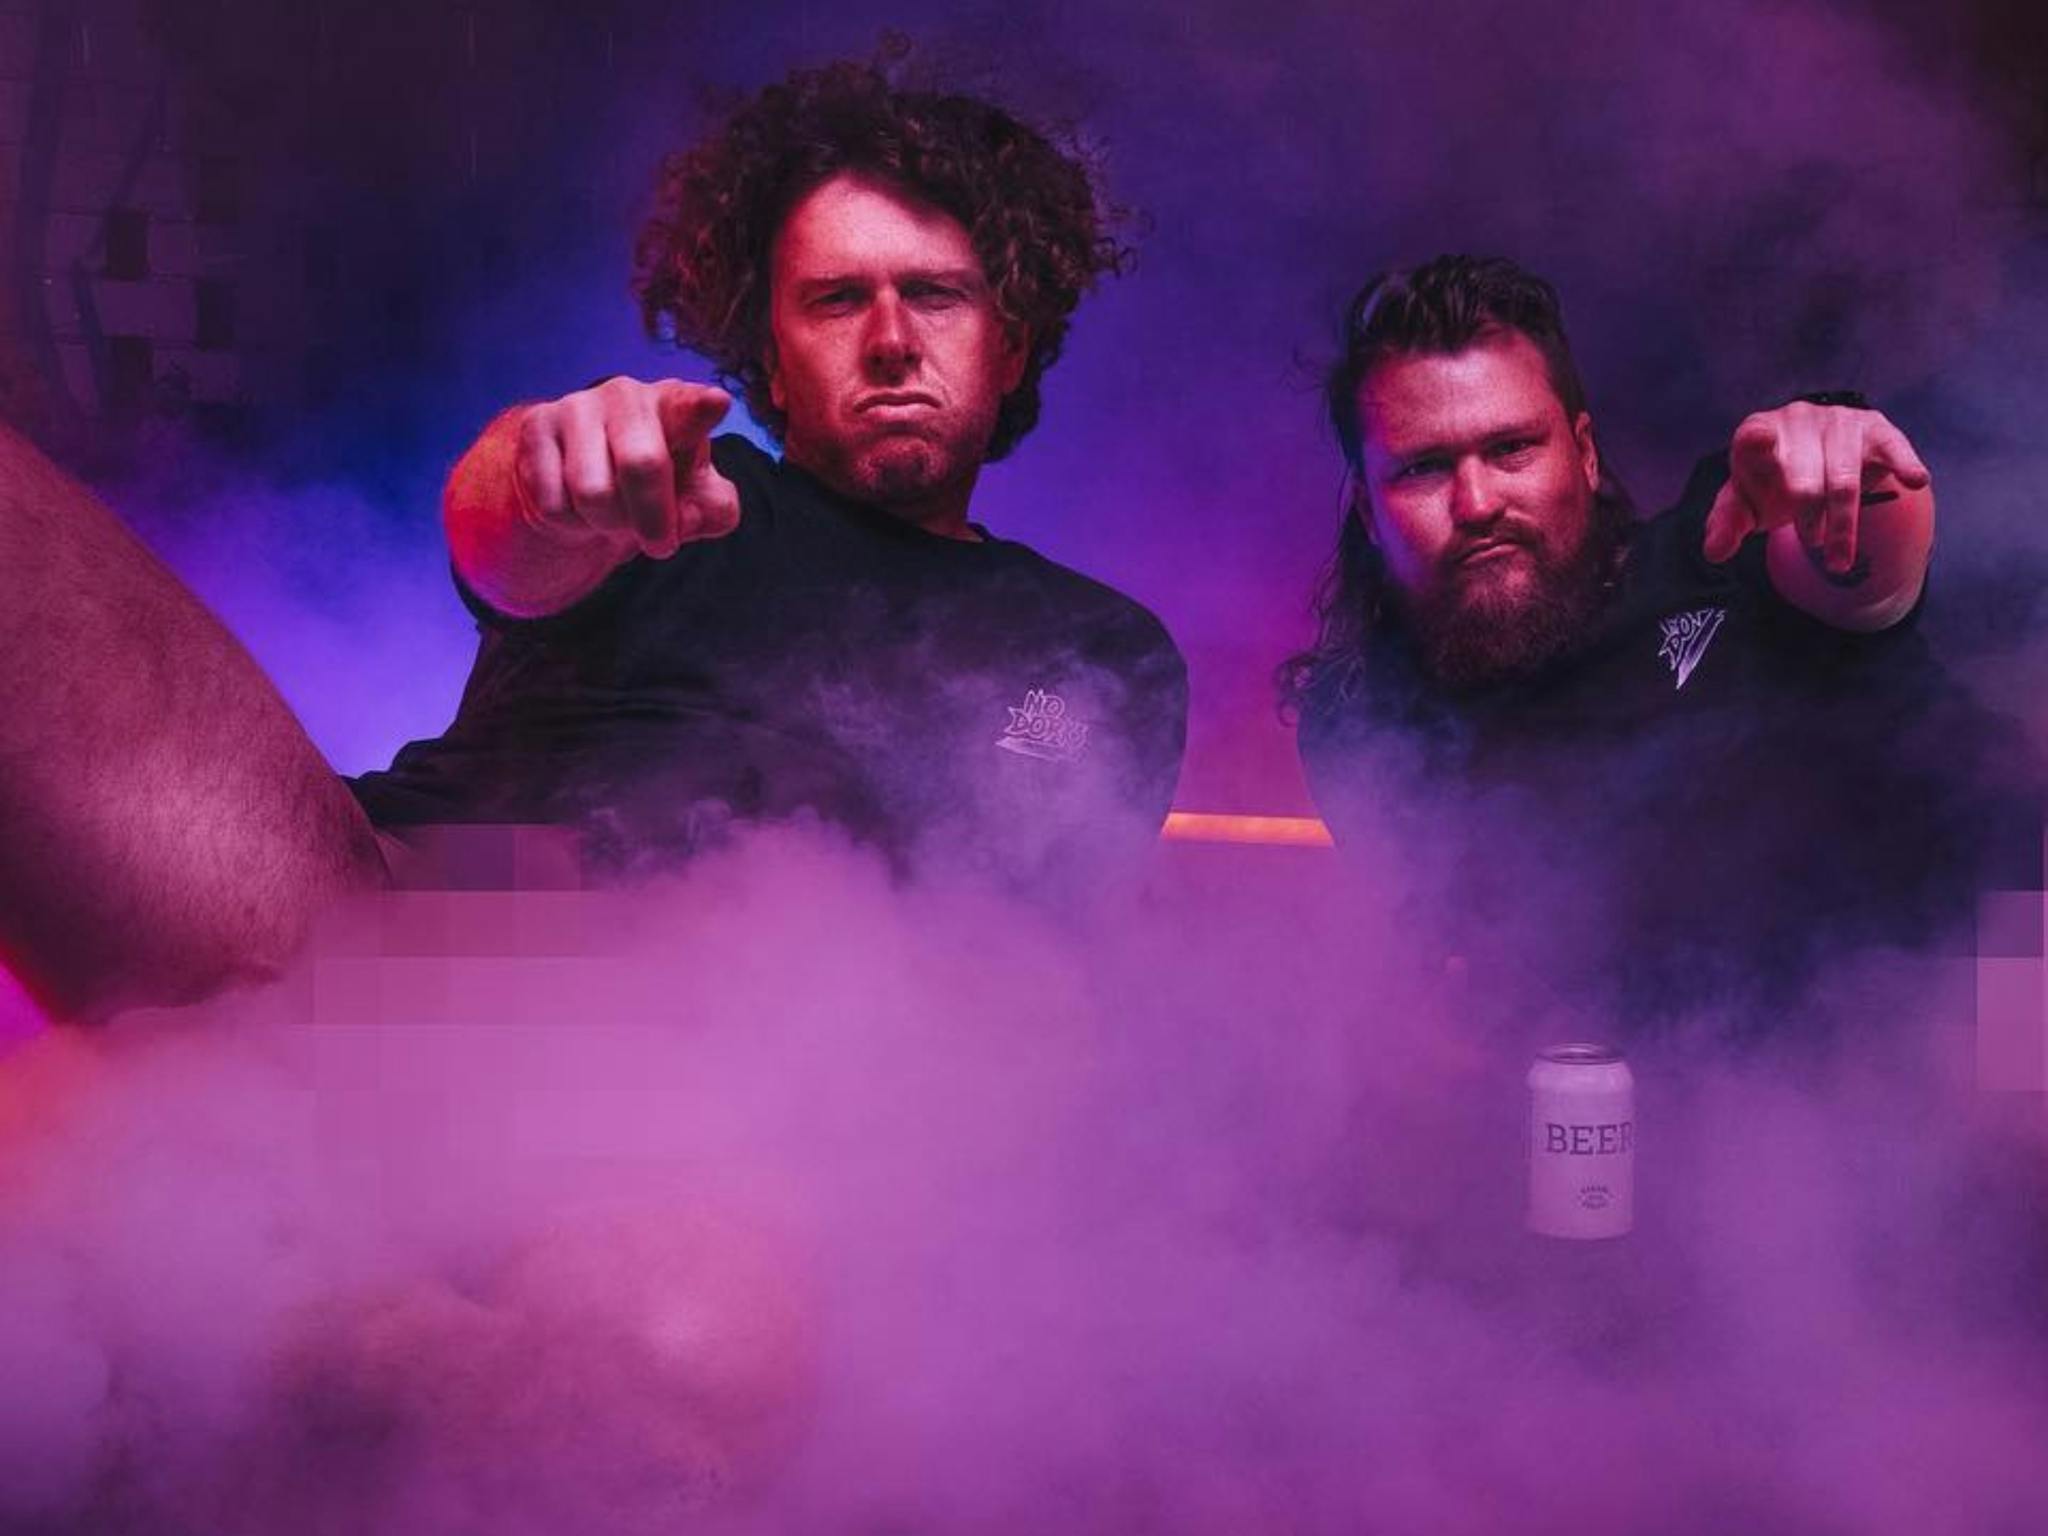 Brett and Nick sit in a purple smoky room. They are pointing at the camera.